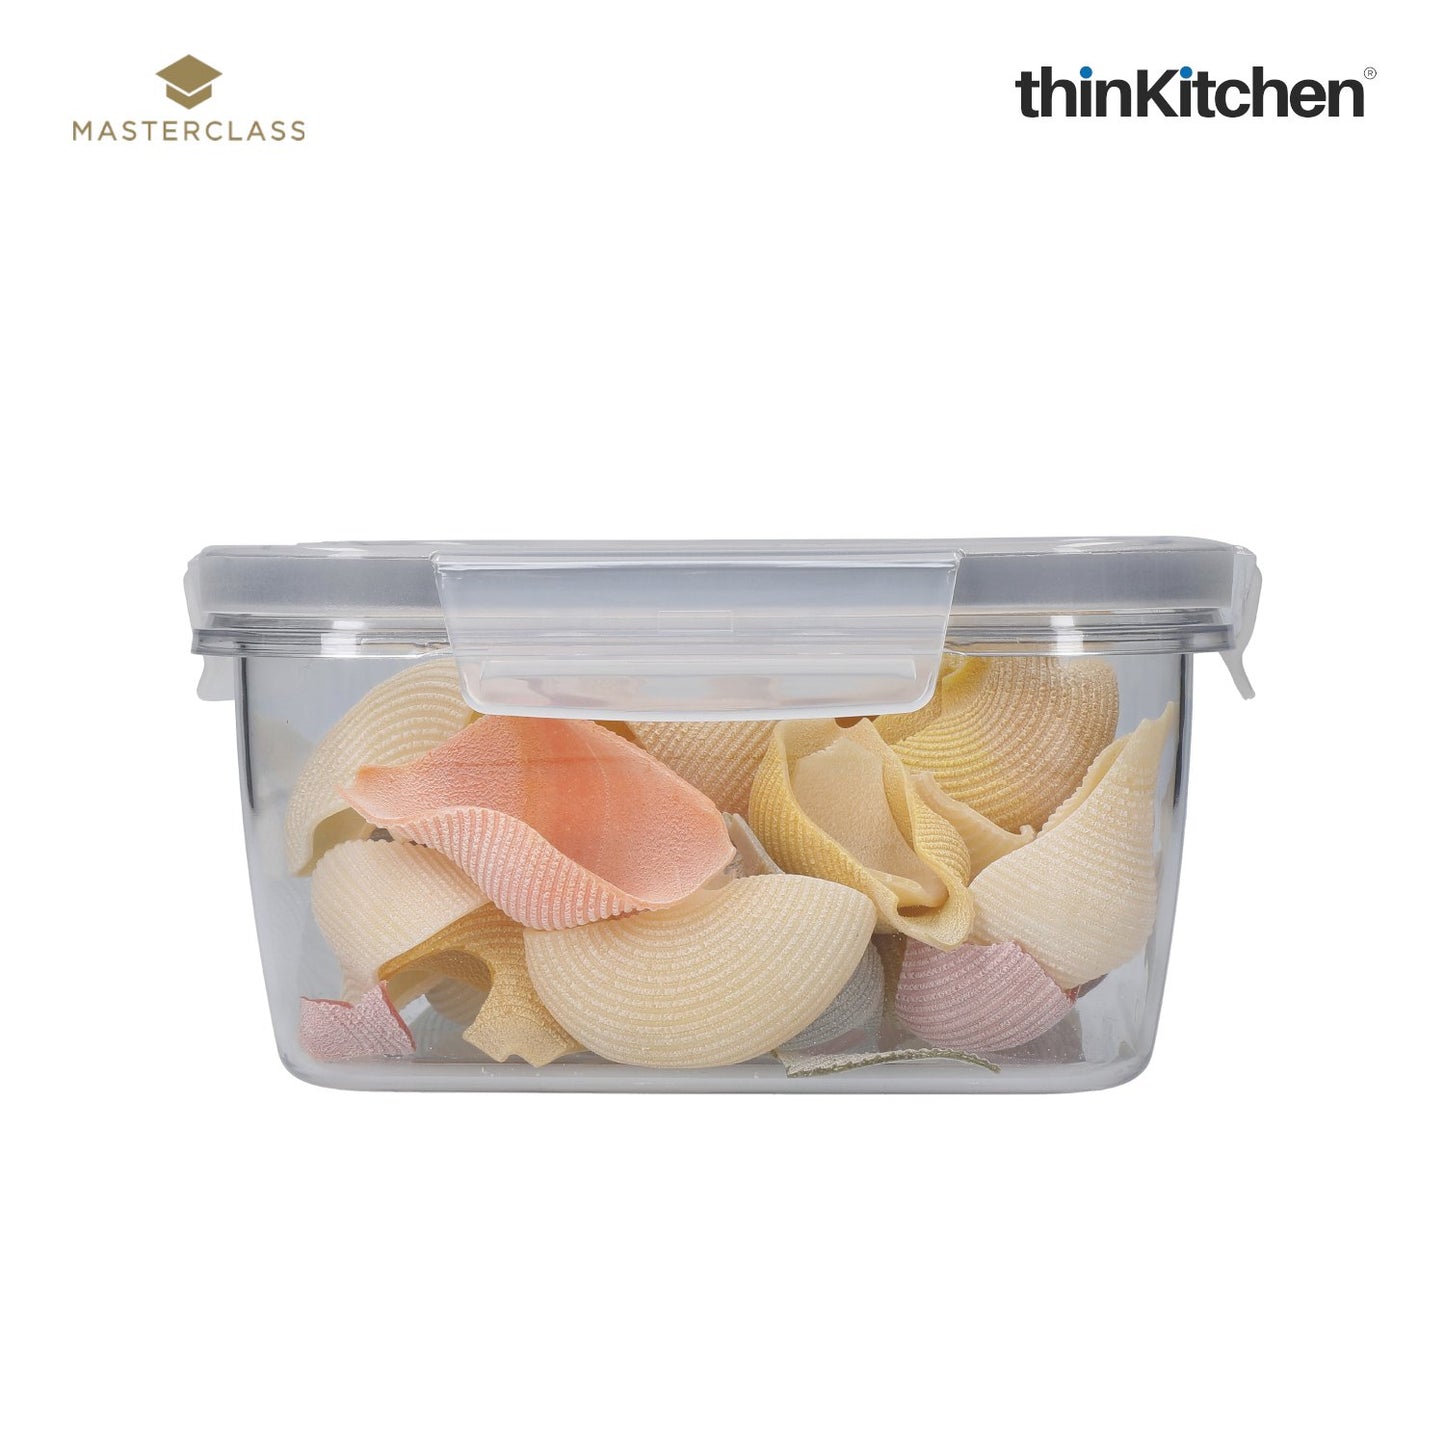 Masterclass Recycled Eco Snap Food Storage Container Square 1400ml